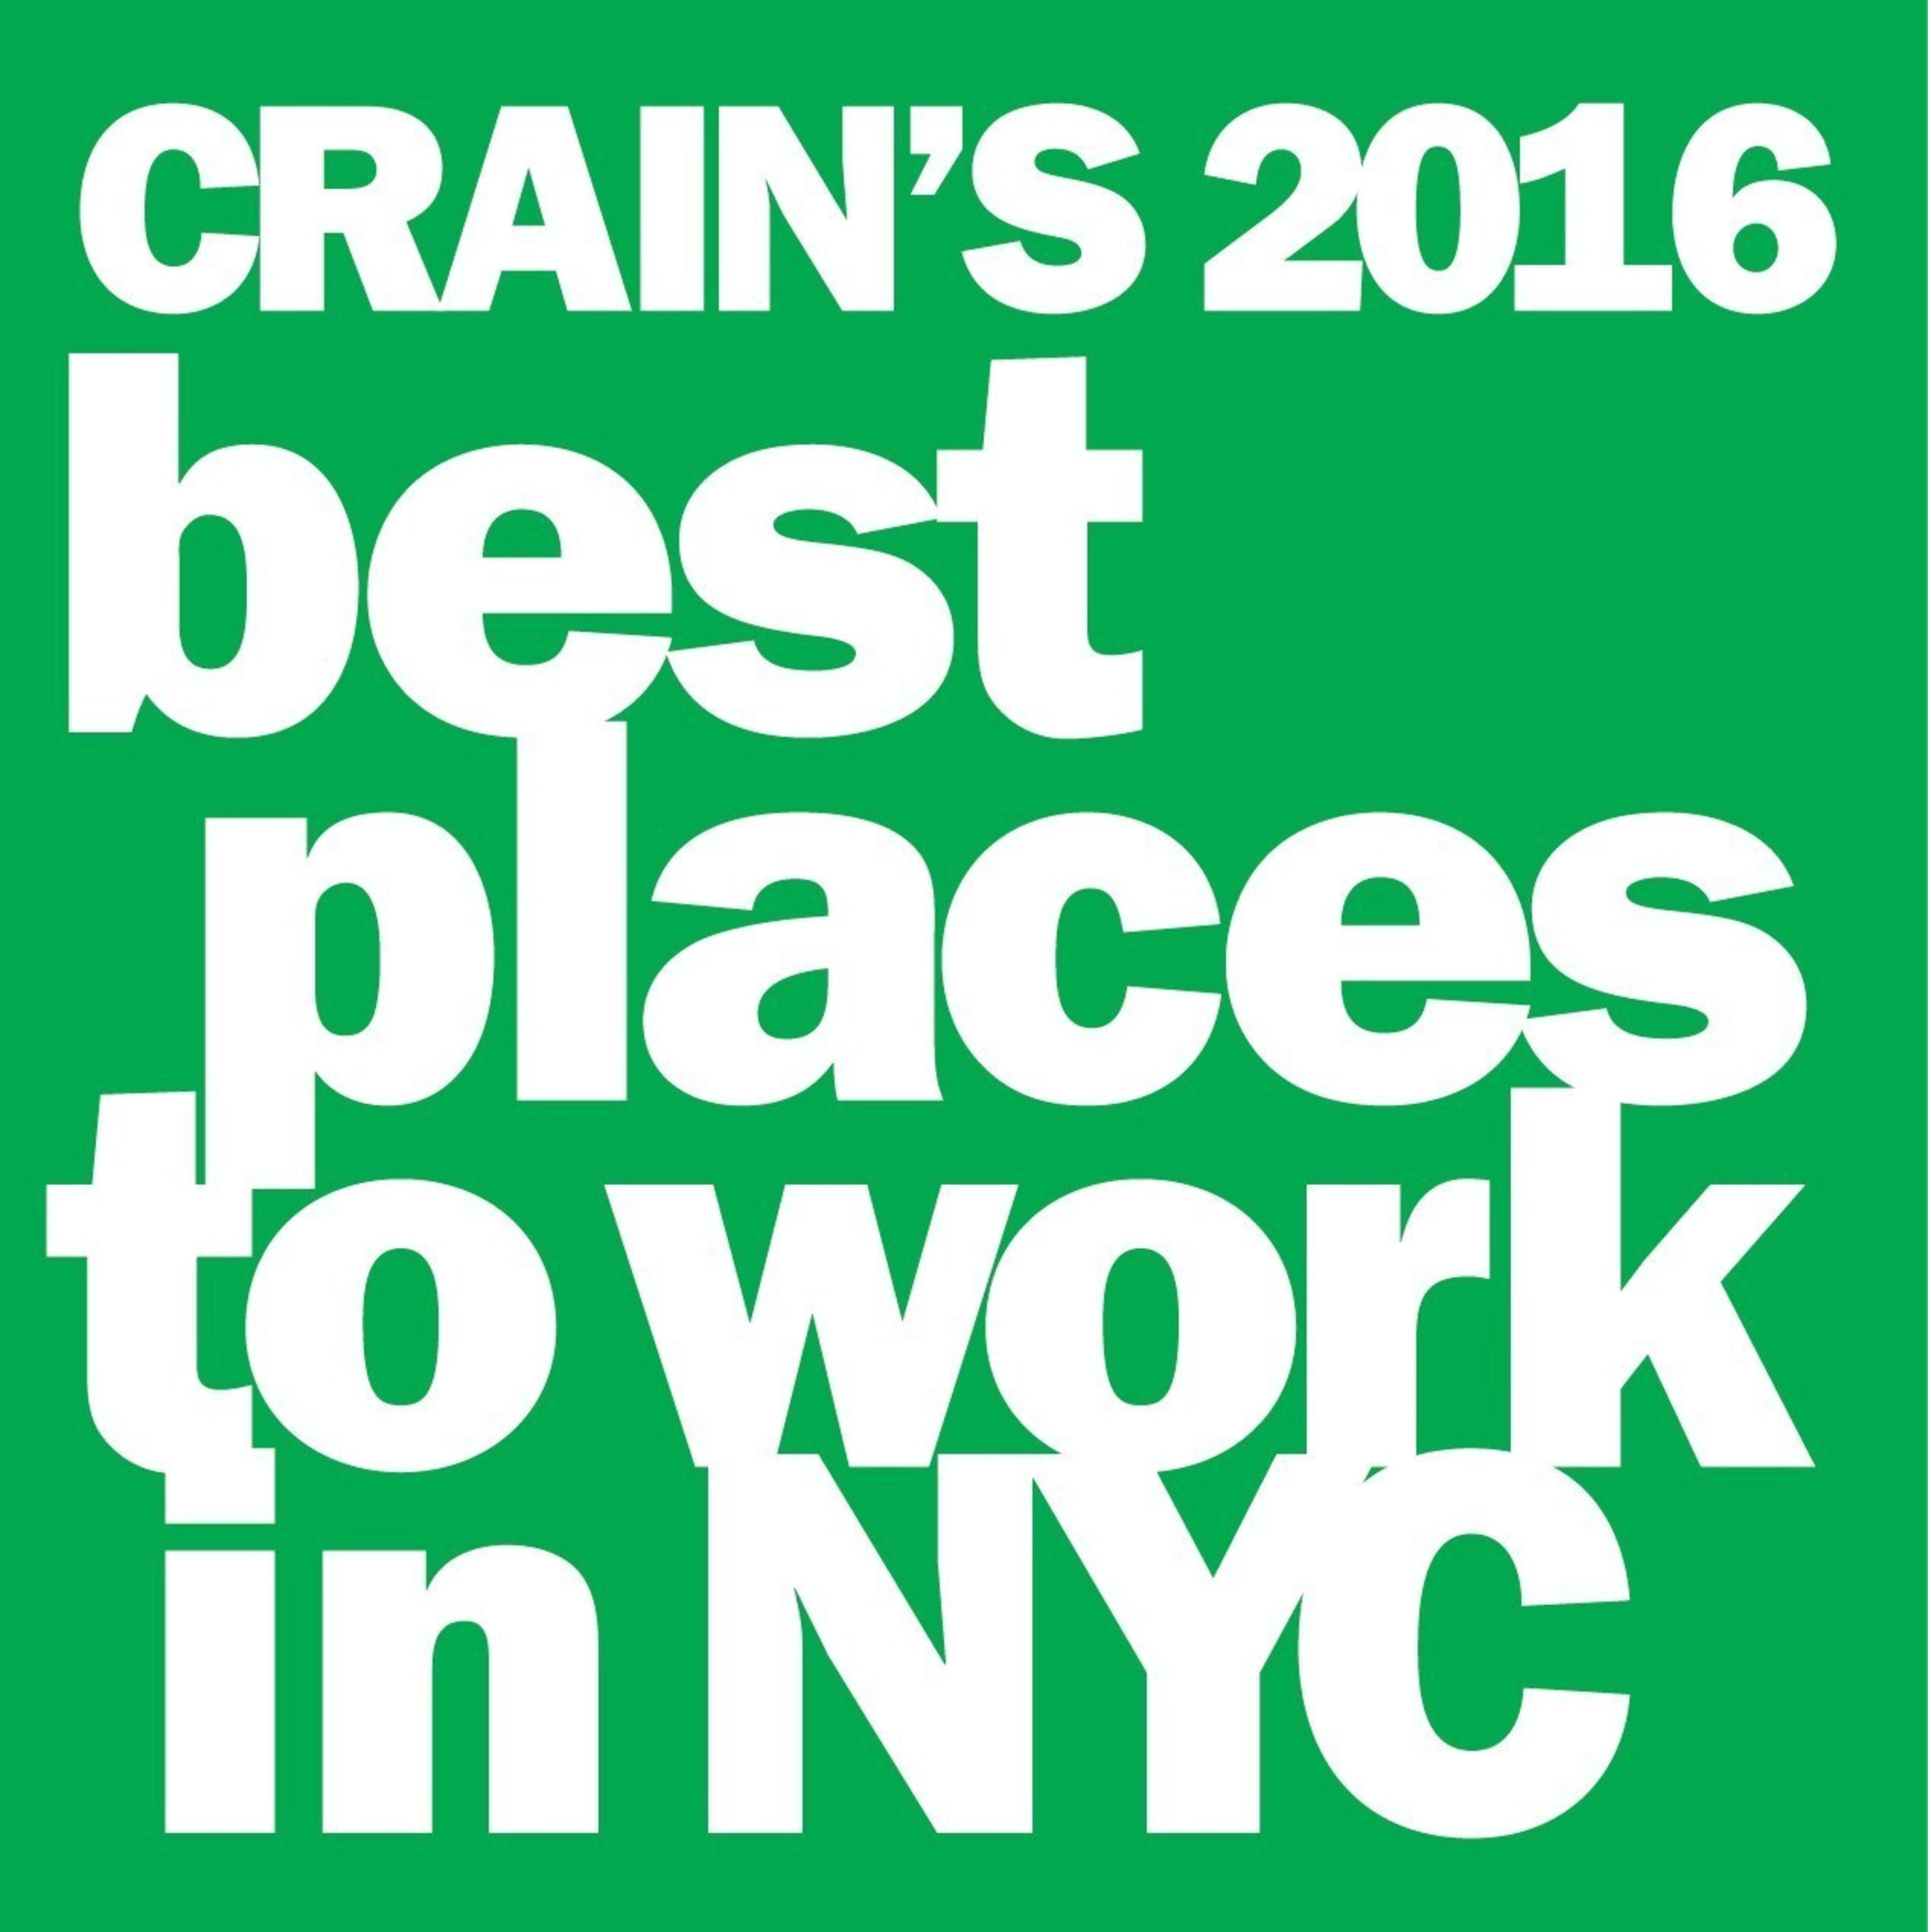 BuzzBack Market Research among 2016 Best Places to Work in New York City. Companies from across all five boroughs participated in the two-part survey process to determine the Best Places to Work..